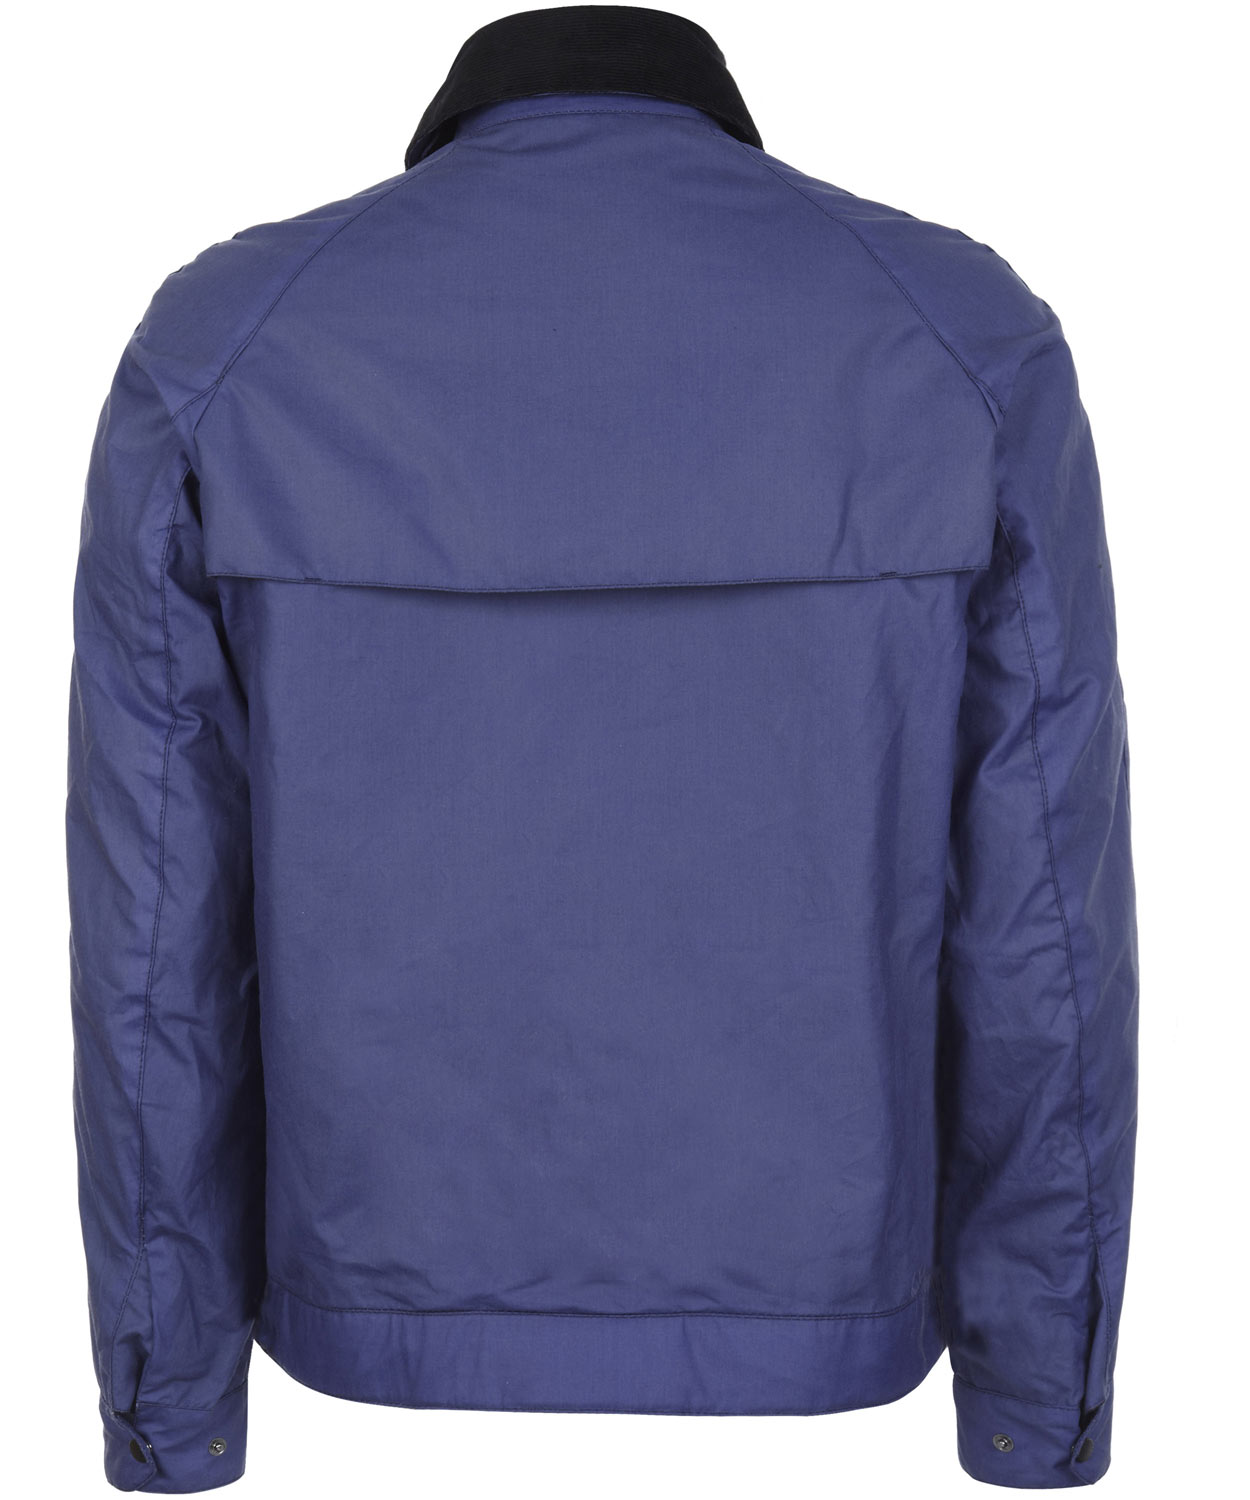 Lyst - Barbour Blue Waxed Cotton Bomber Jacket in Blue for Men